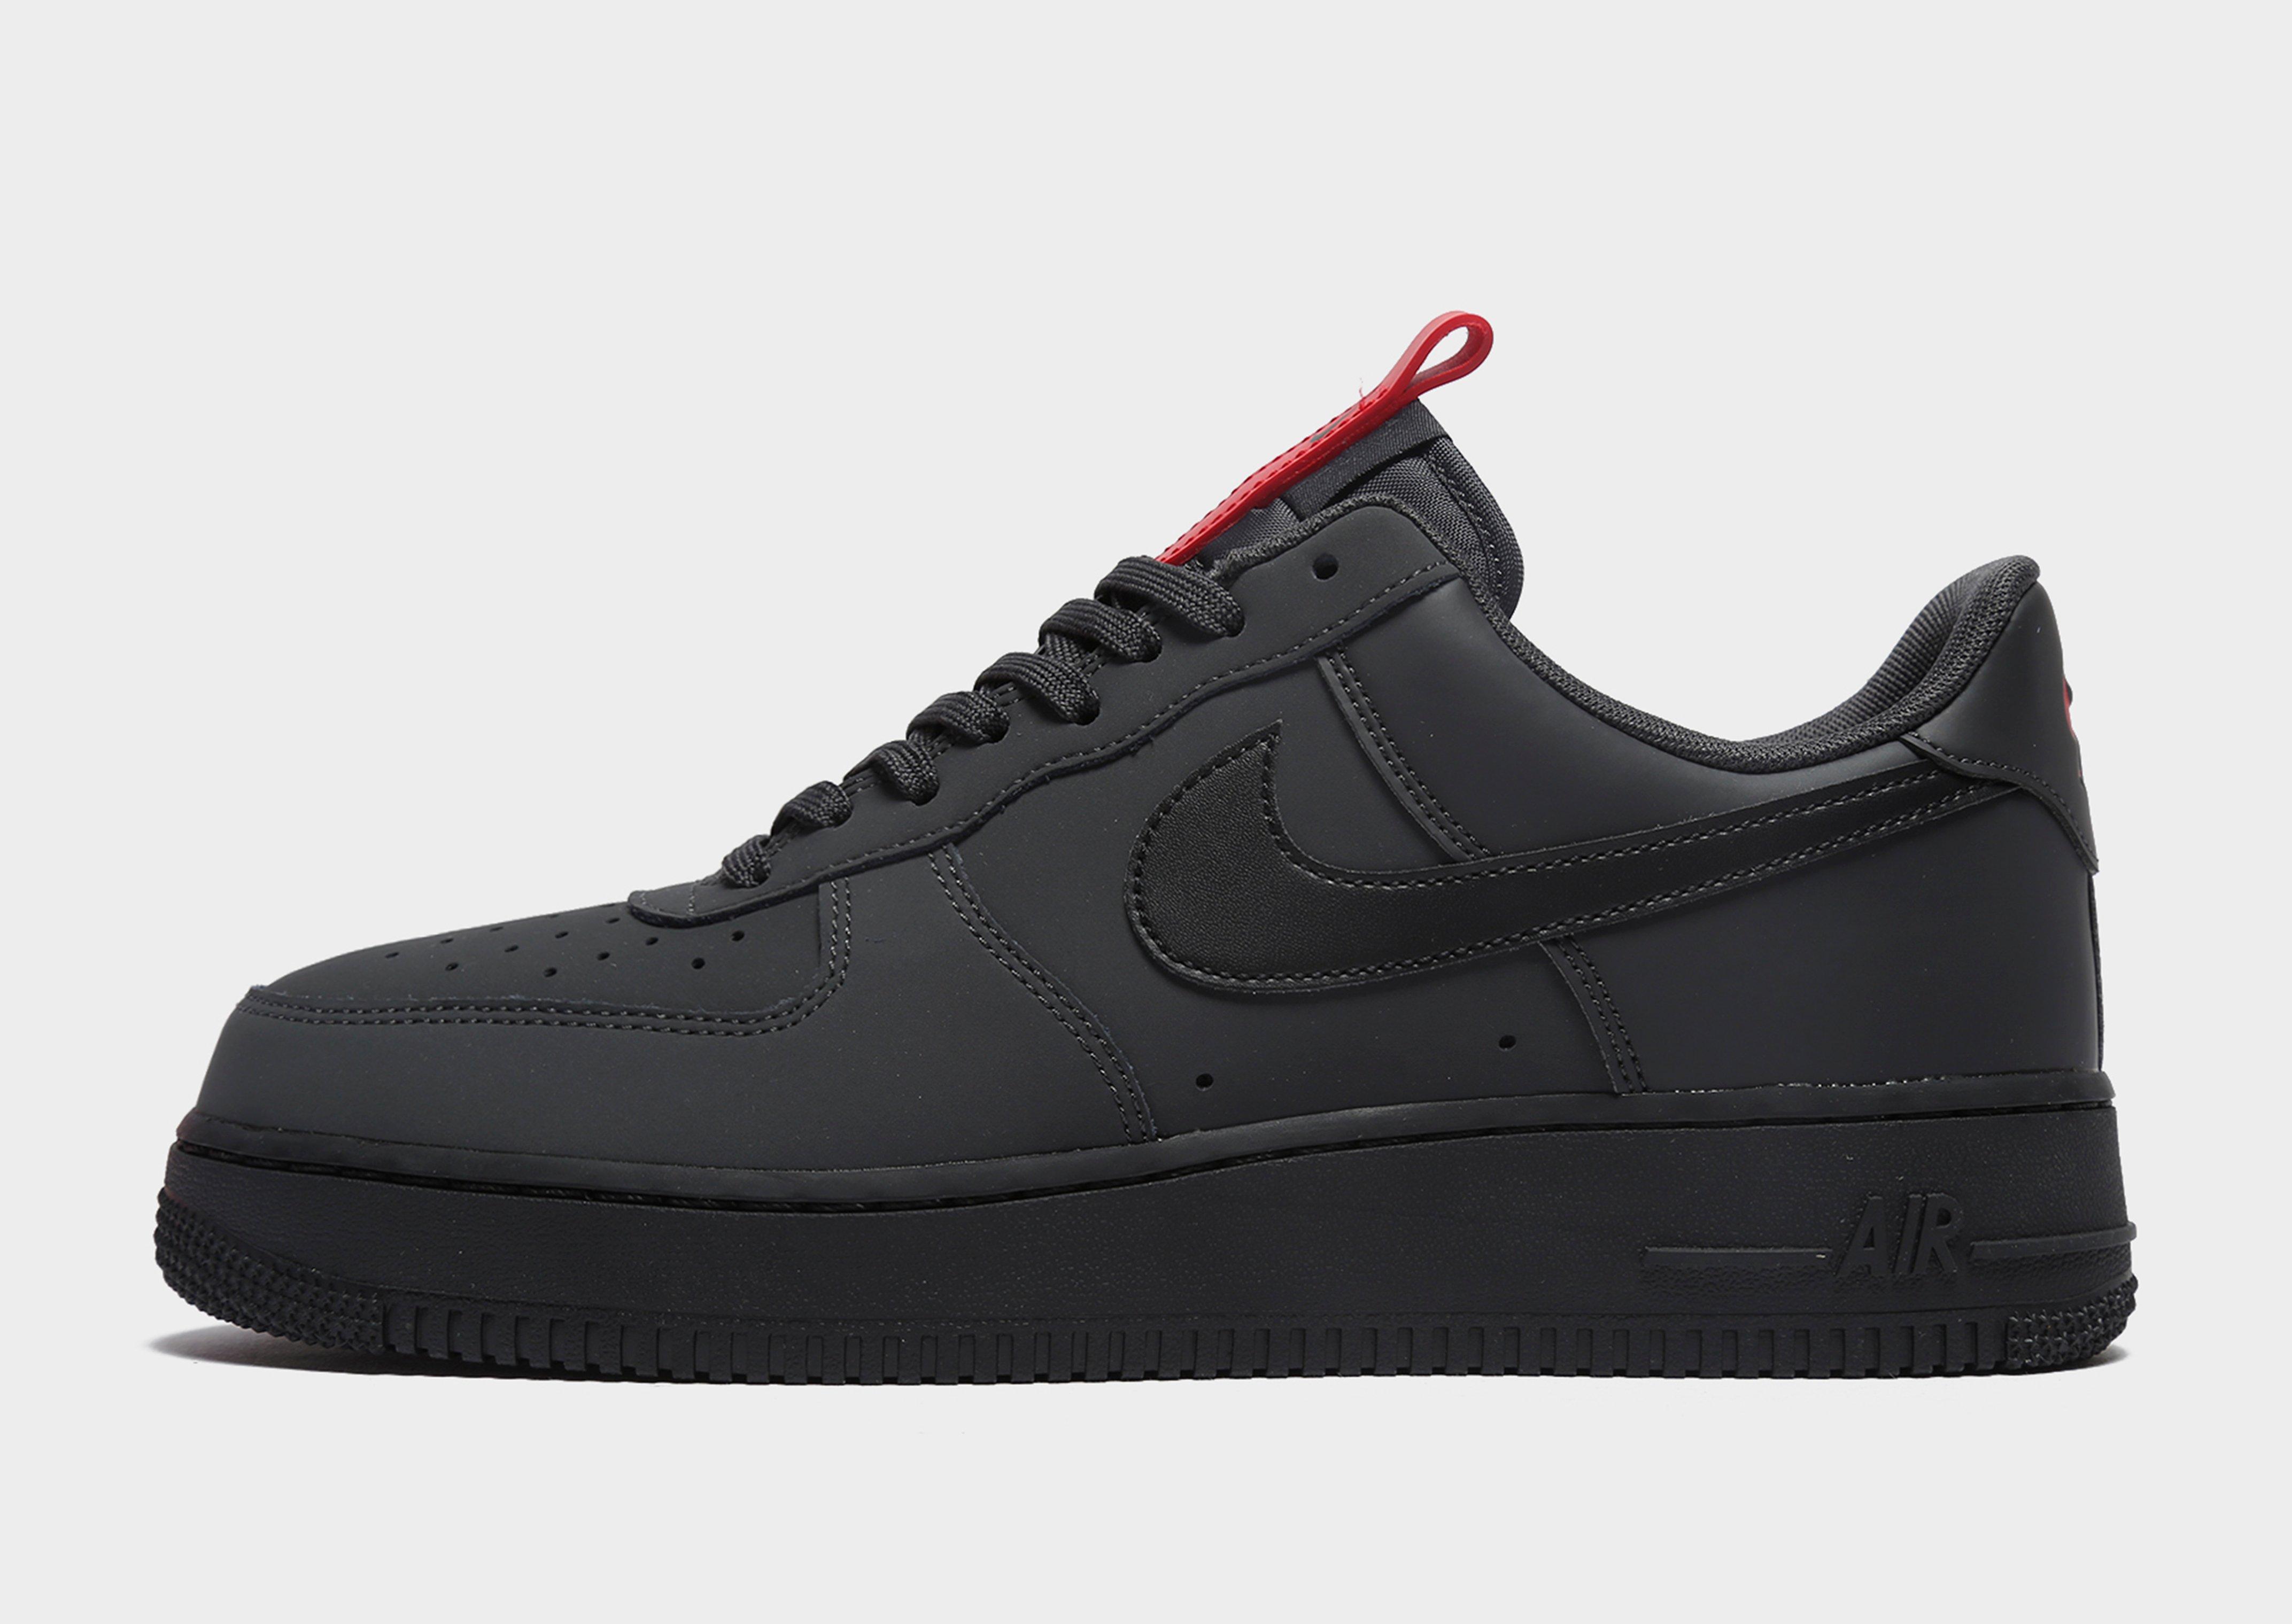 air force 1 anthracite black and red jd